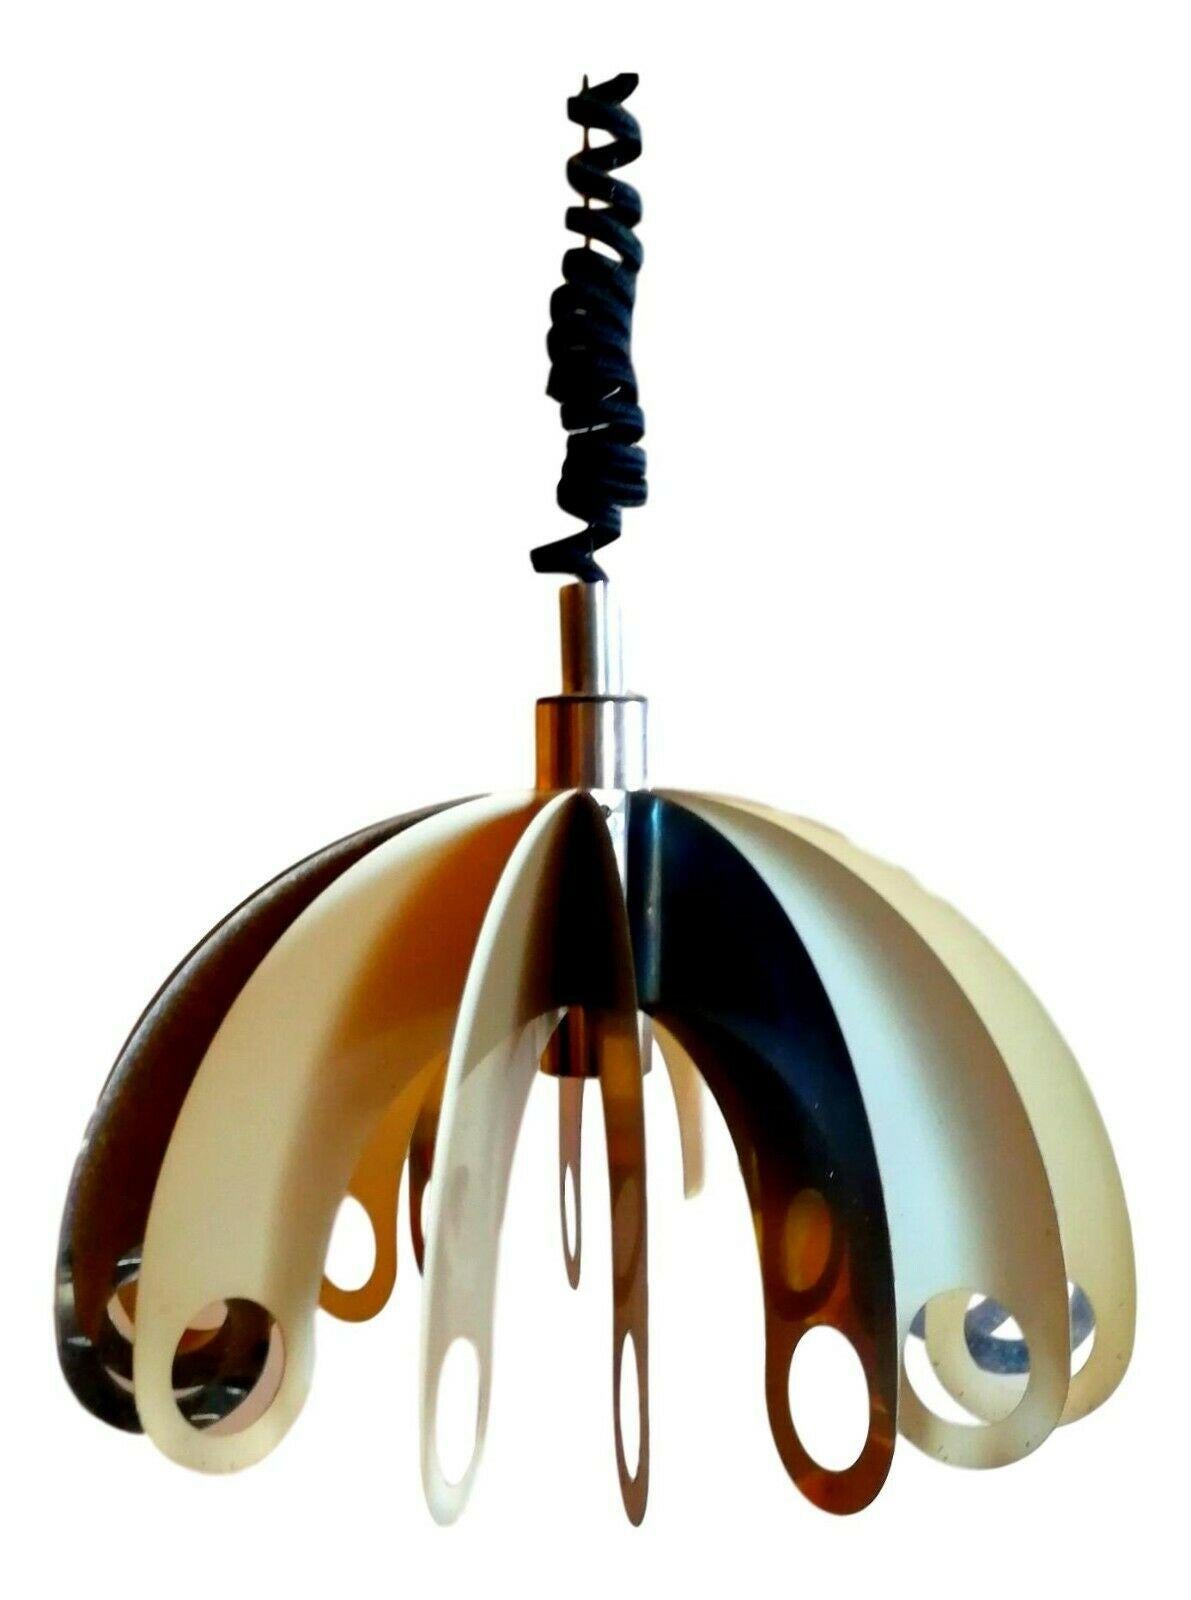 Extravagant original progressive chandelier from the 70s, made of two-tone banded perforated steel

Power cable with latch mechanism

It measures approximately 75 cm in height, including the cable, the only part of the speaker just under 40 cm,